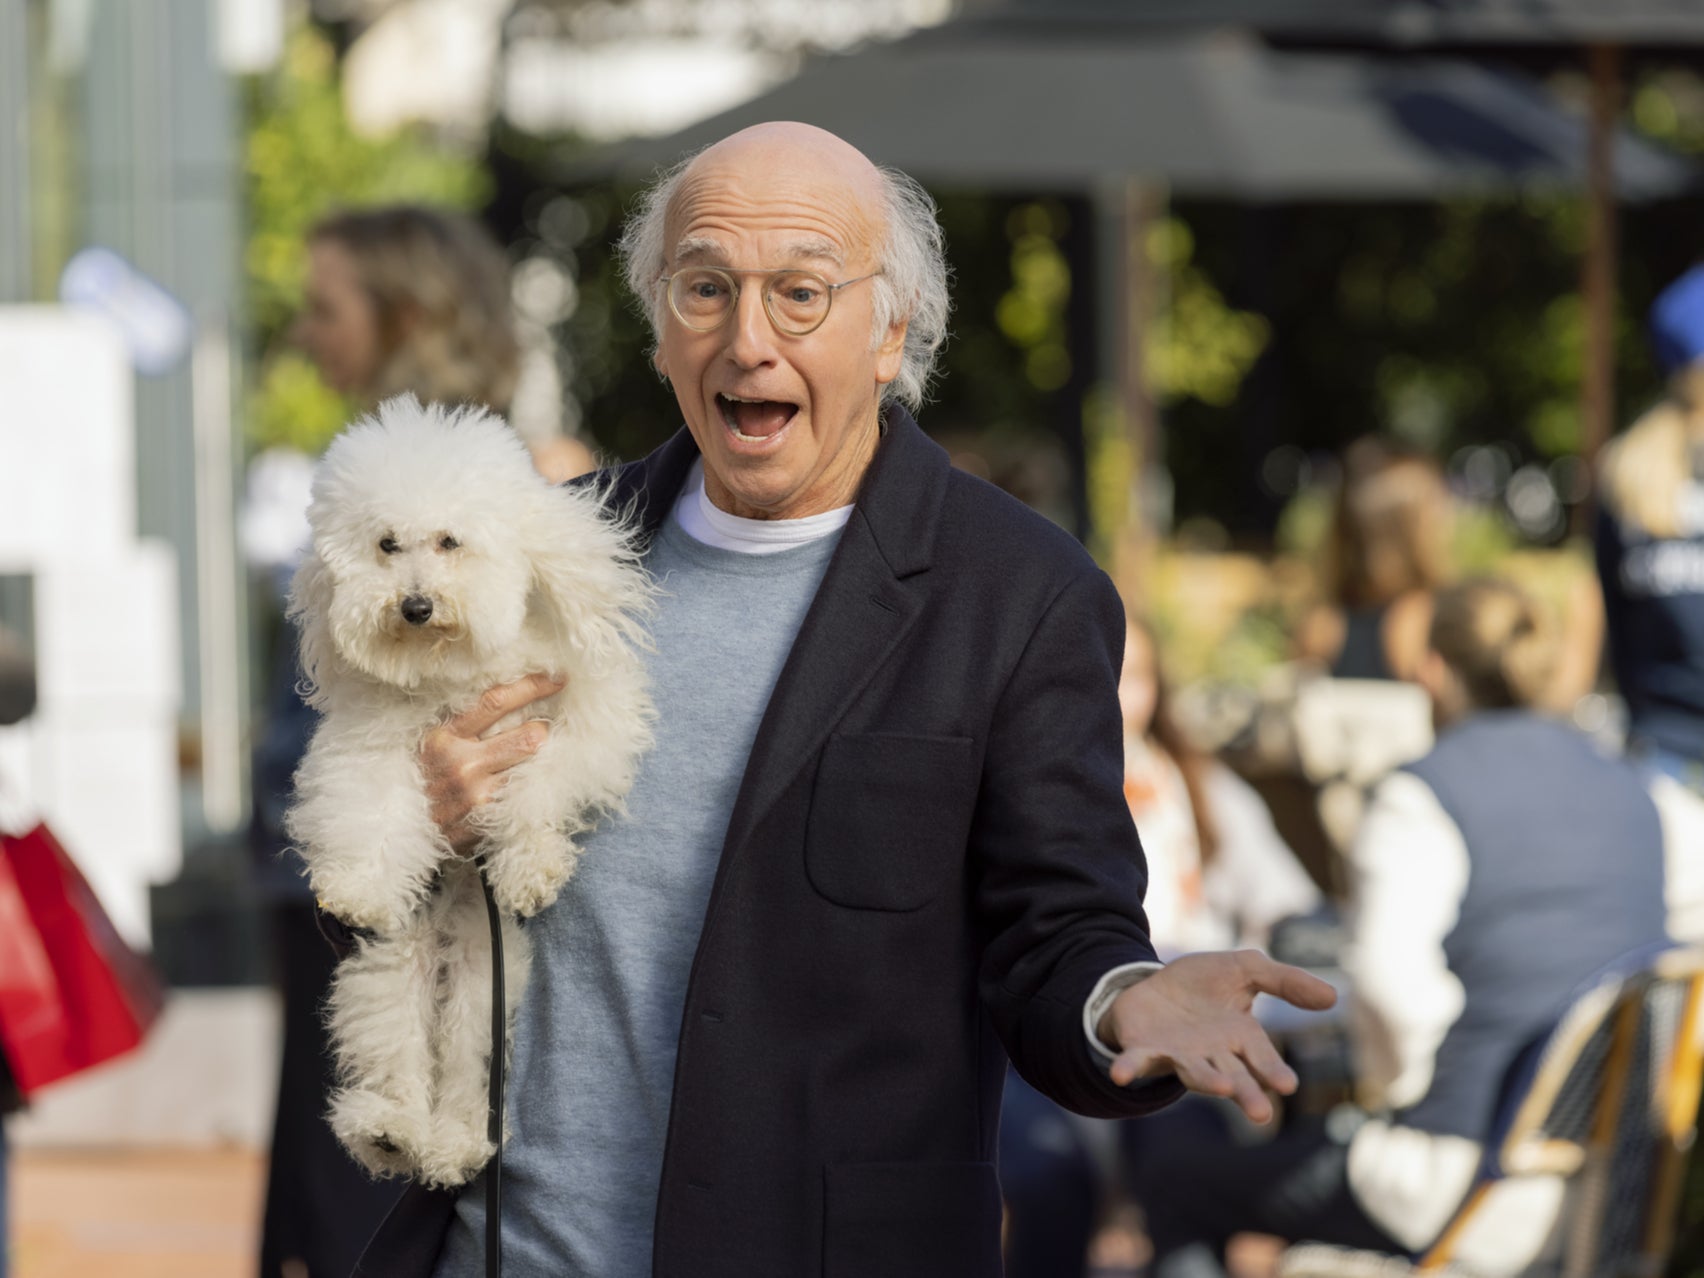 Larry David in ‘Curb Your Enthusiasm’